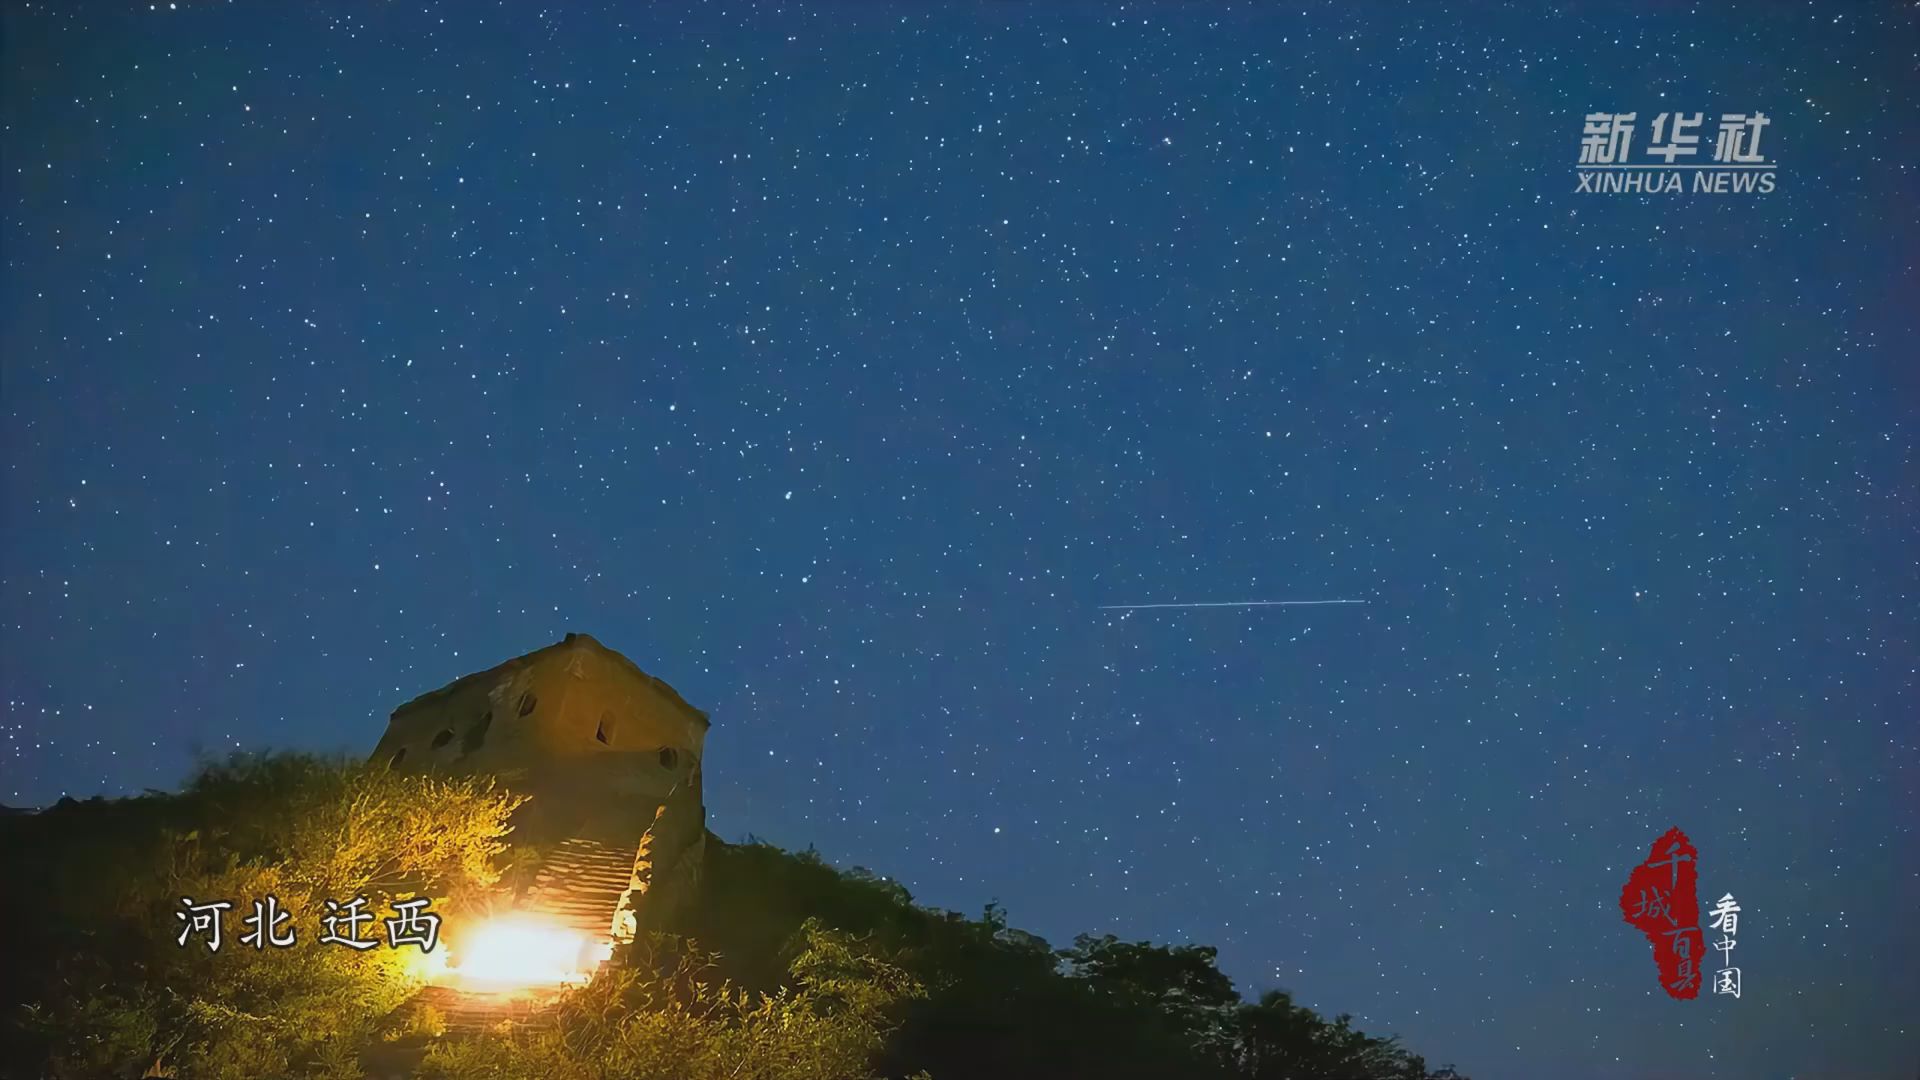  Looking at the Beautiful Starry Sky in Qianxi, Hebei Province by Time lapse Photography